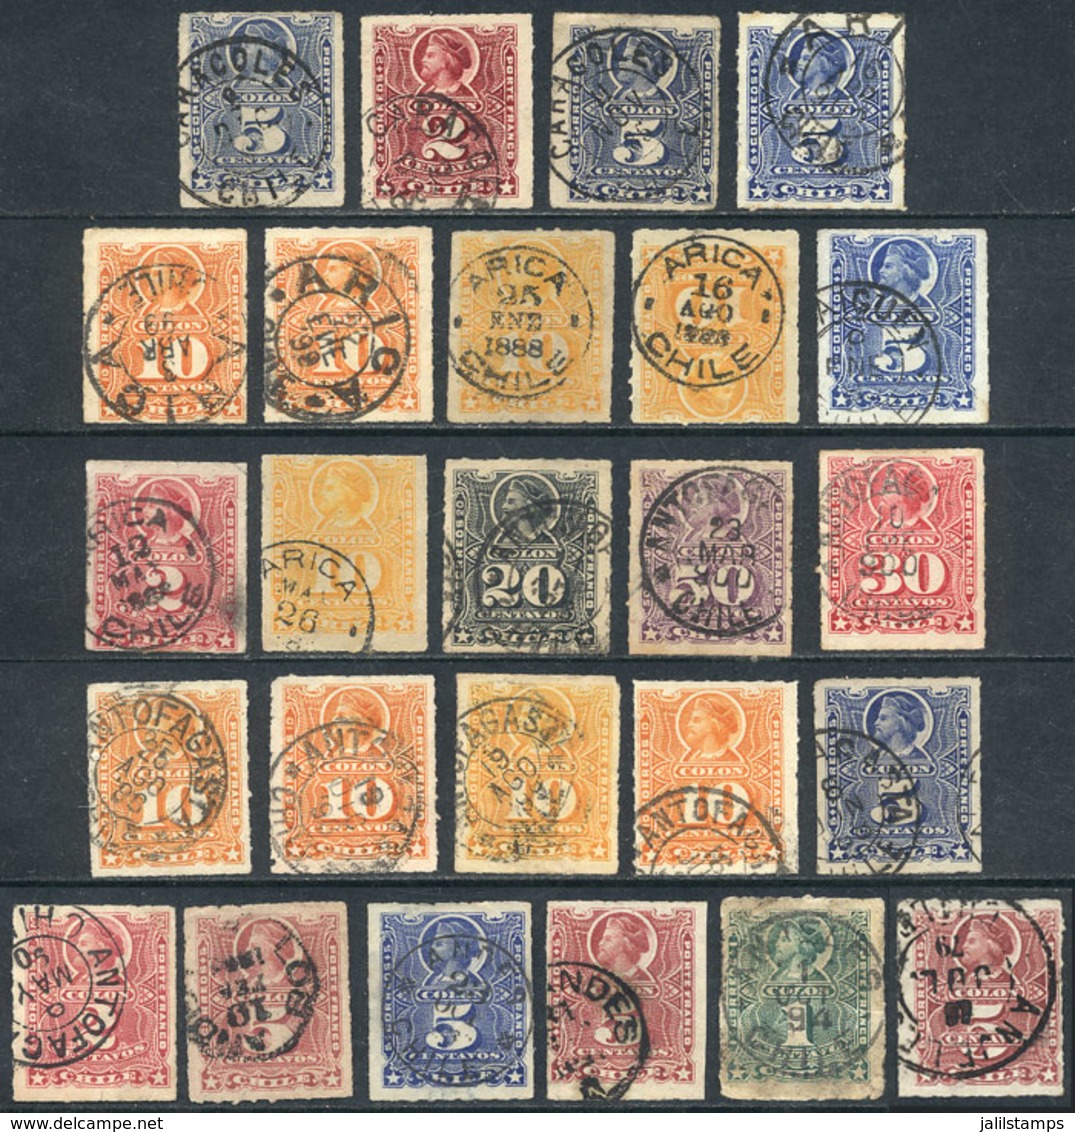 CHILE: More Than 90 Old Stamps, Most With Interesting And Rare Cancels, Very Interesting Lot To The Specialist, LOW STAR - Chile